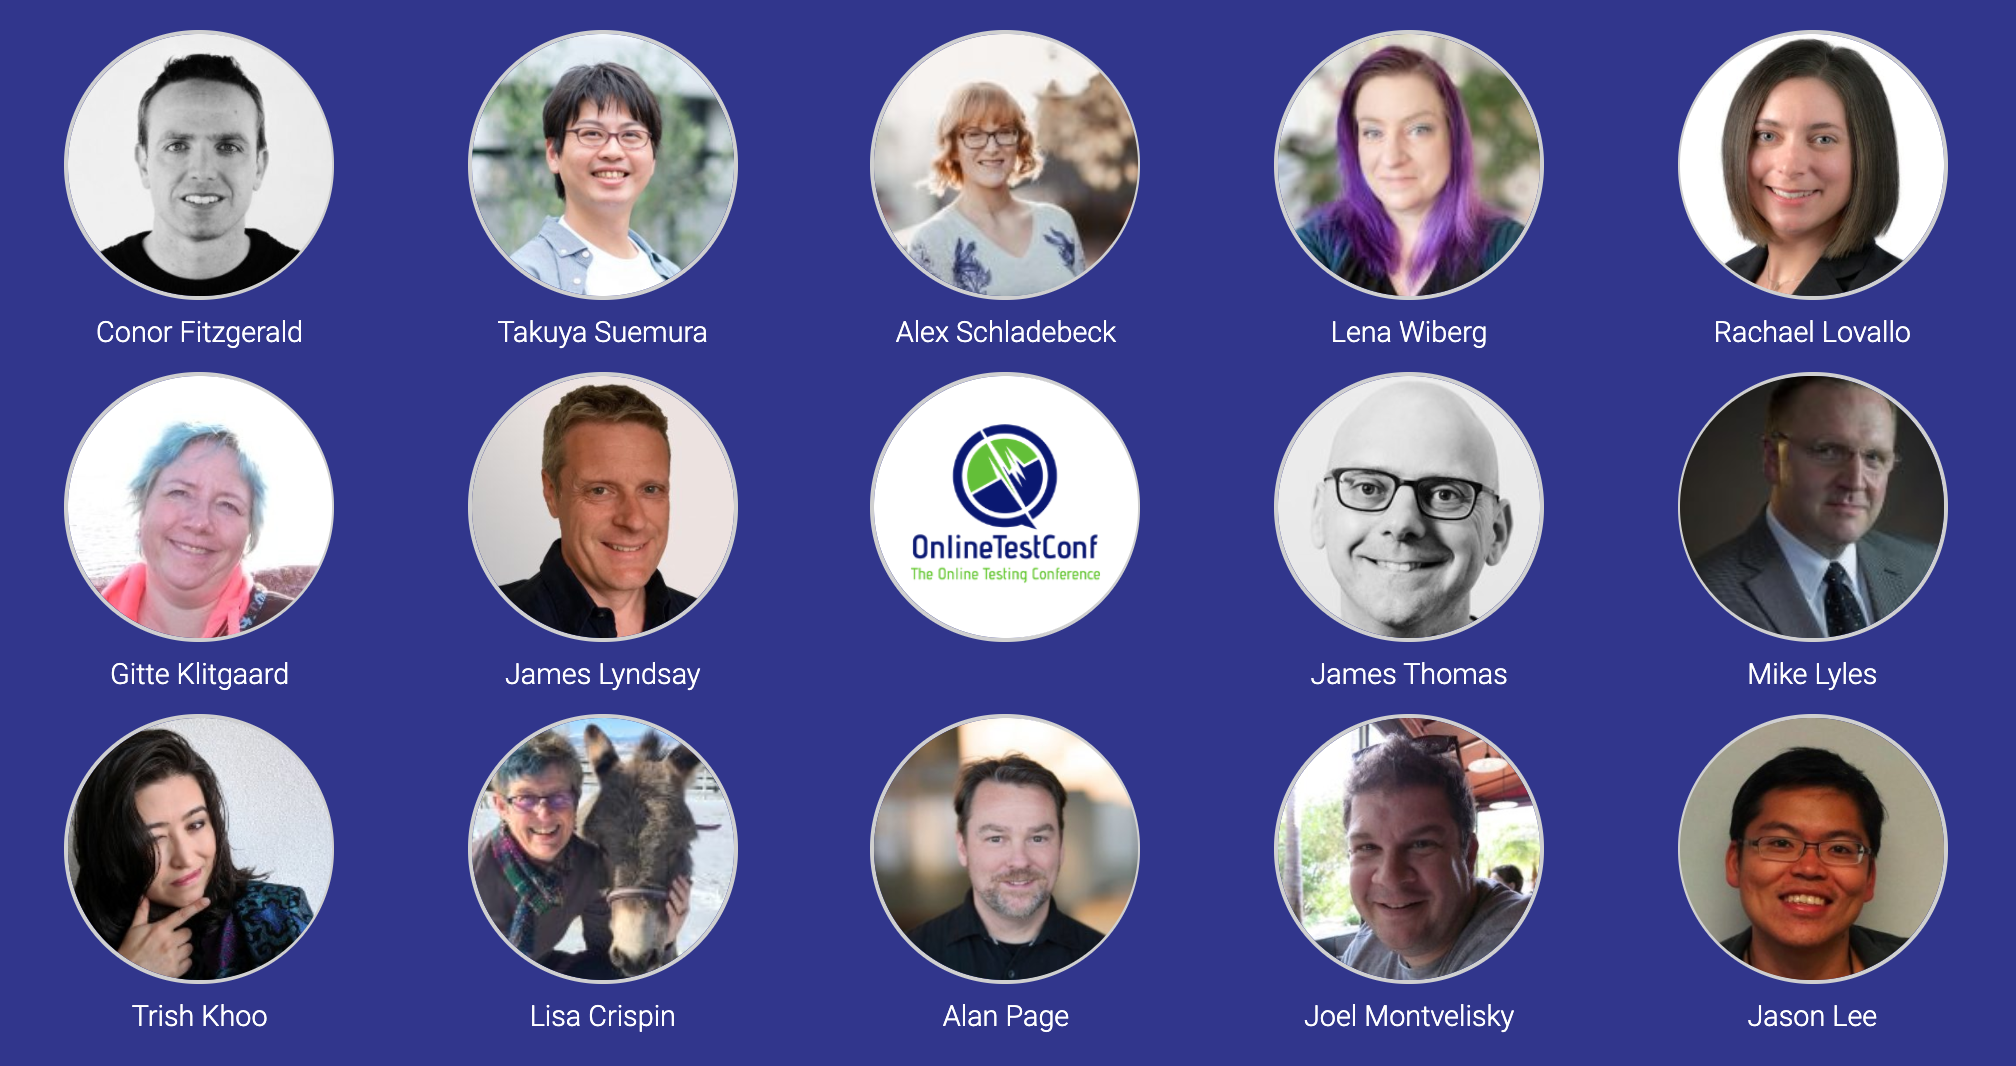 Meet the speakers of Spring OnlineTestConf 2020